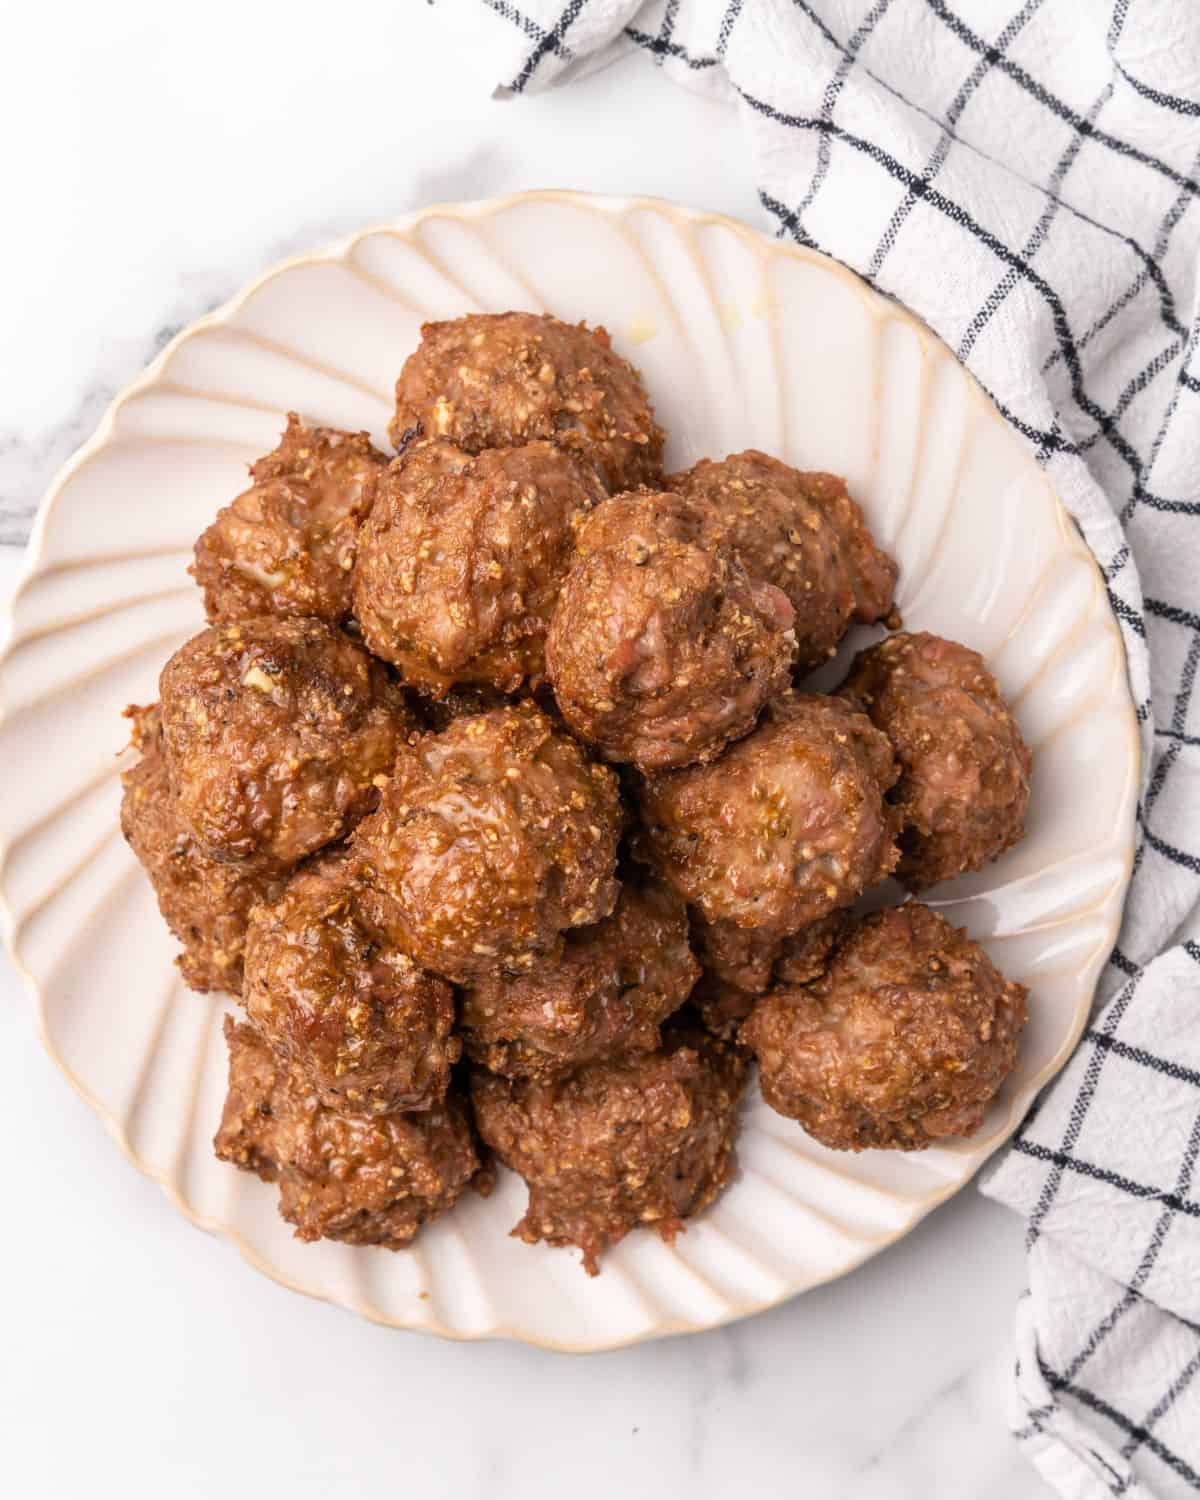 turkey meatballs without sauce on a plate.